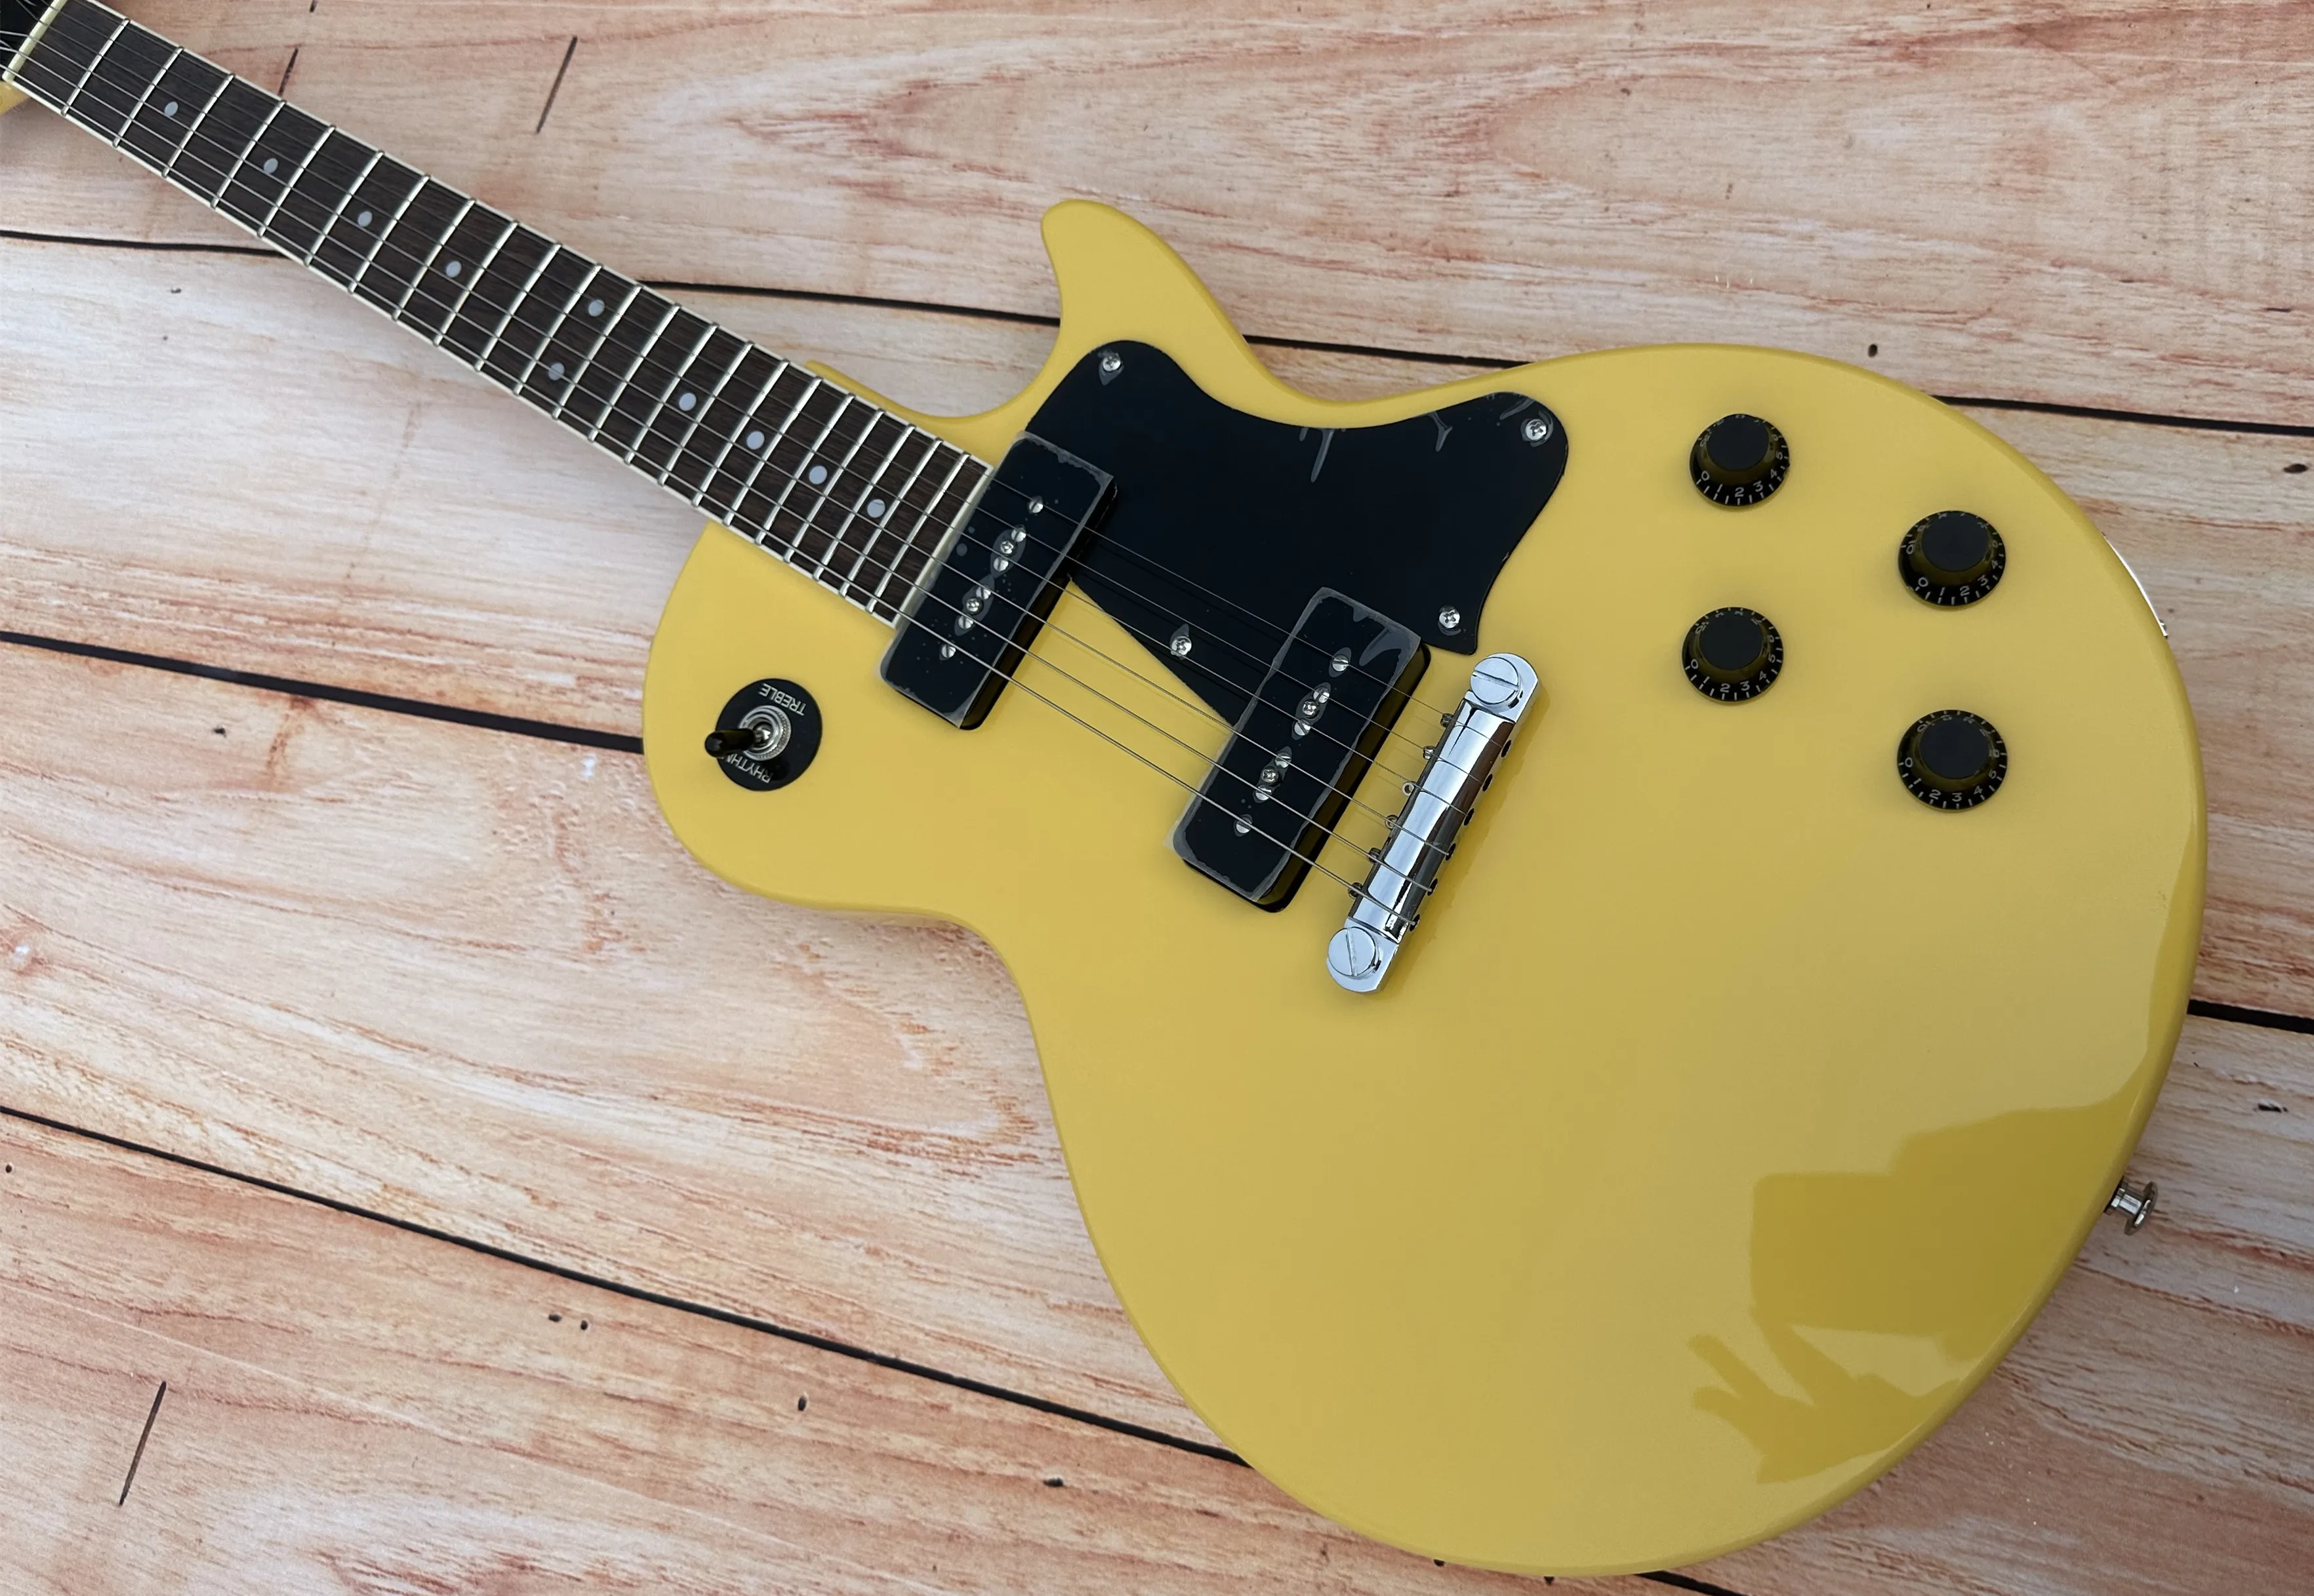 

Standard electric guitar, TV yellow, black P90 pickup, imported paint, available in stock, fast shipping